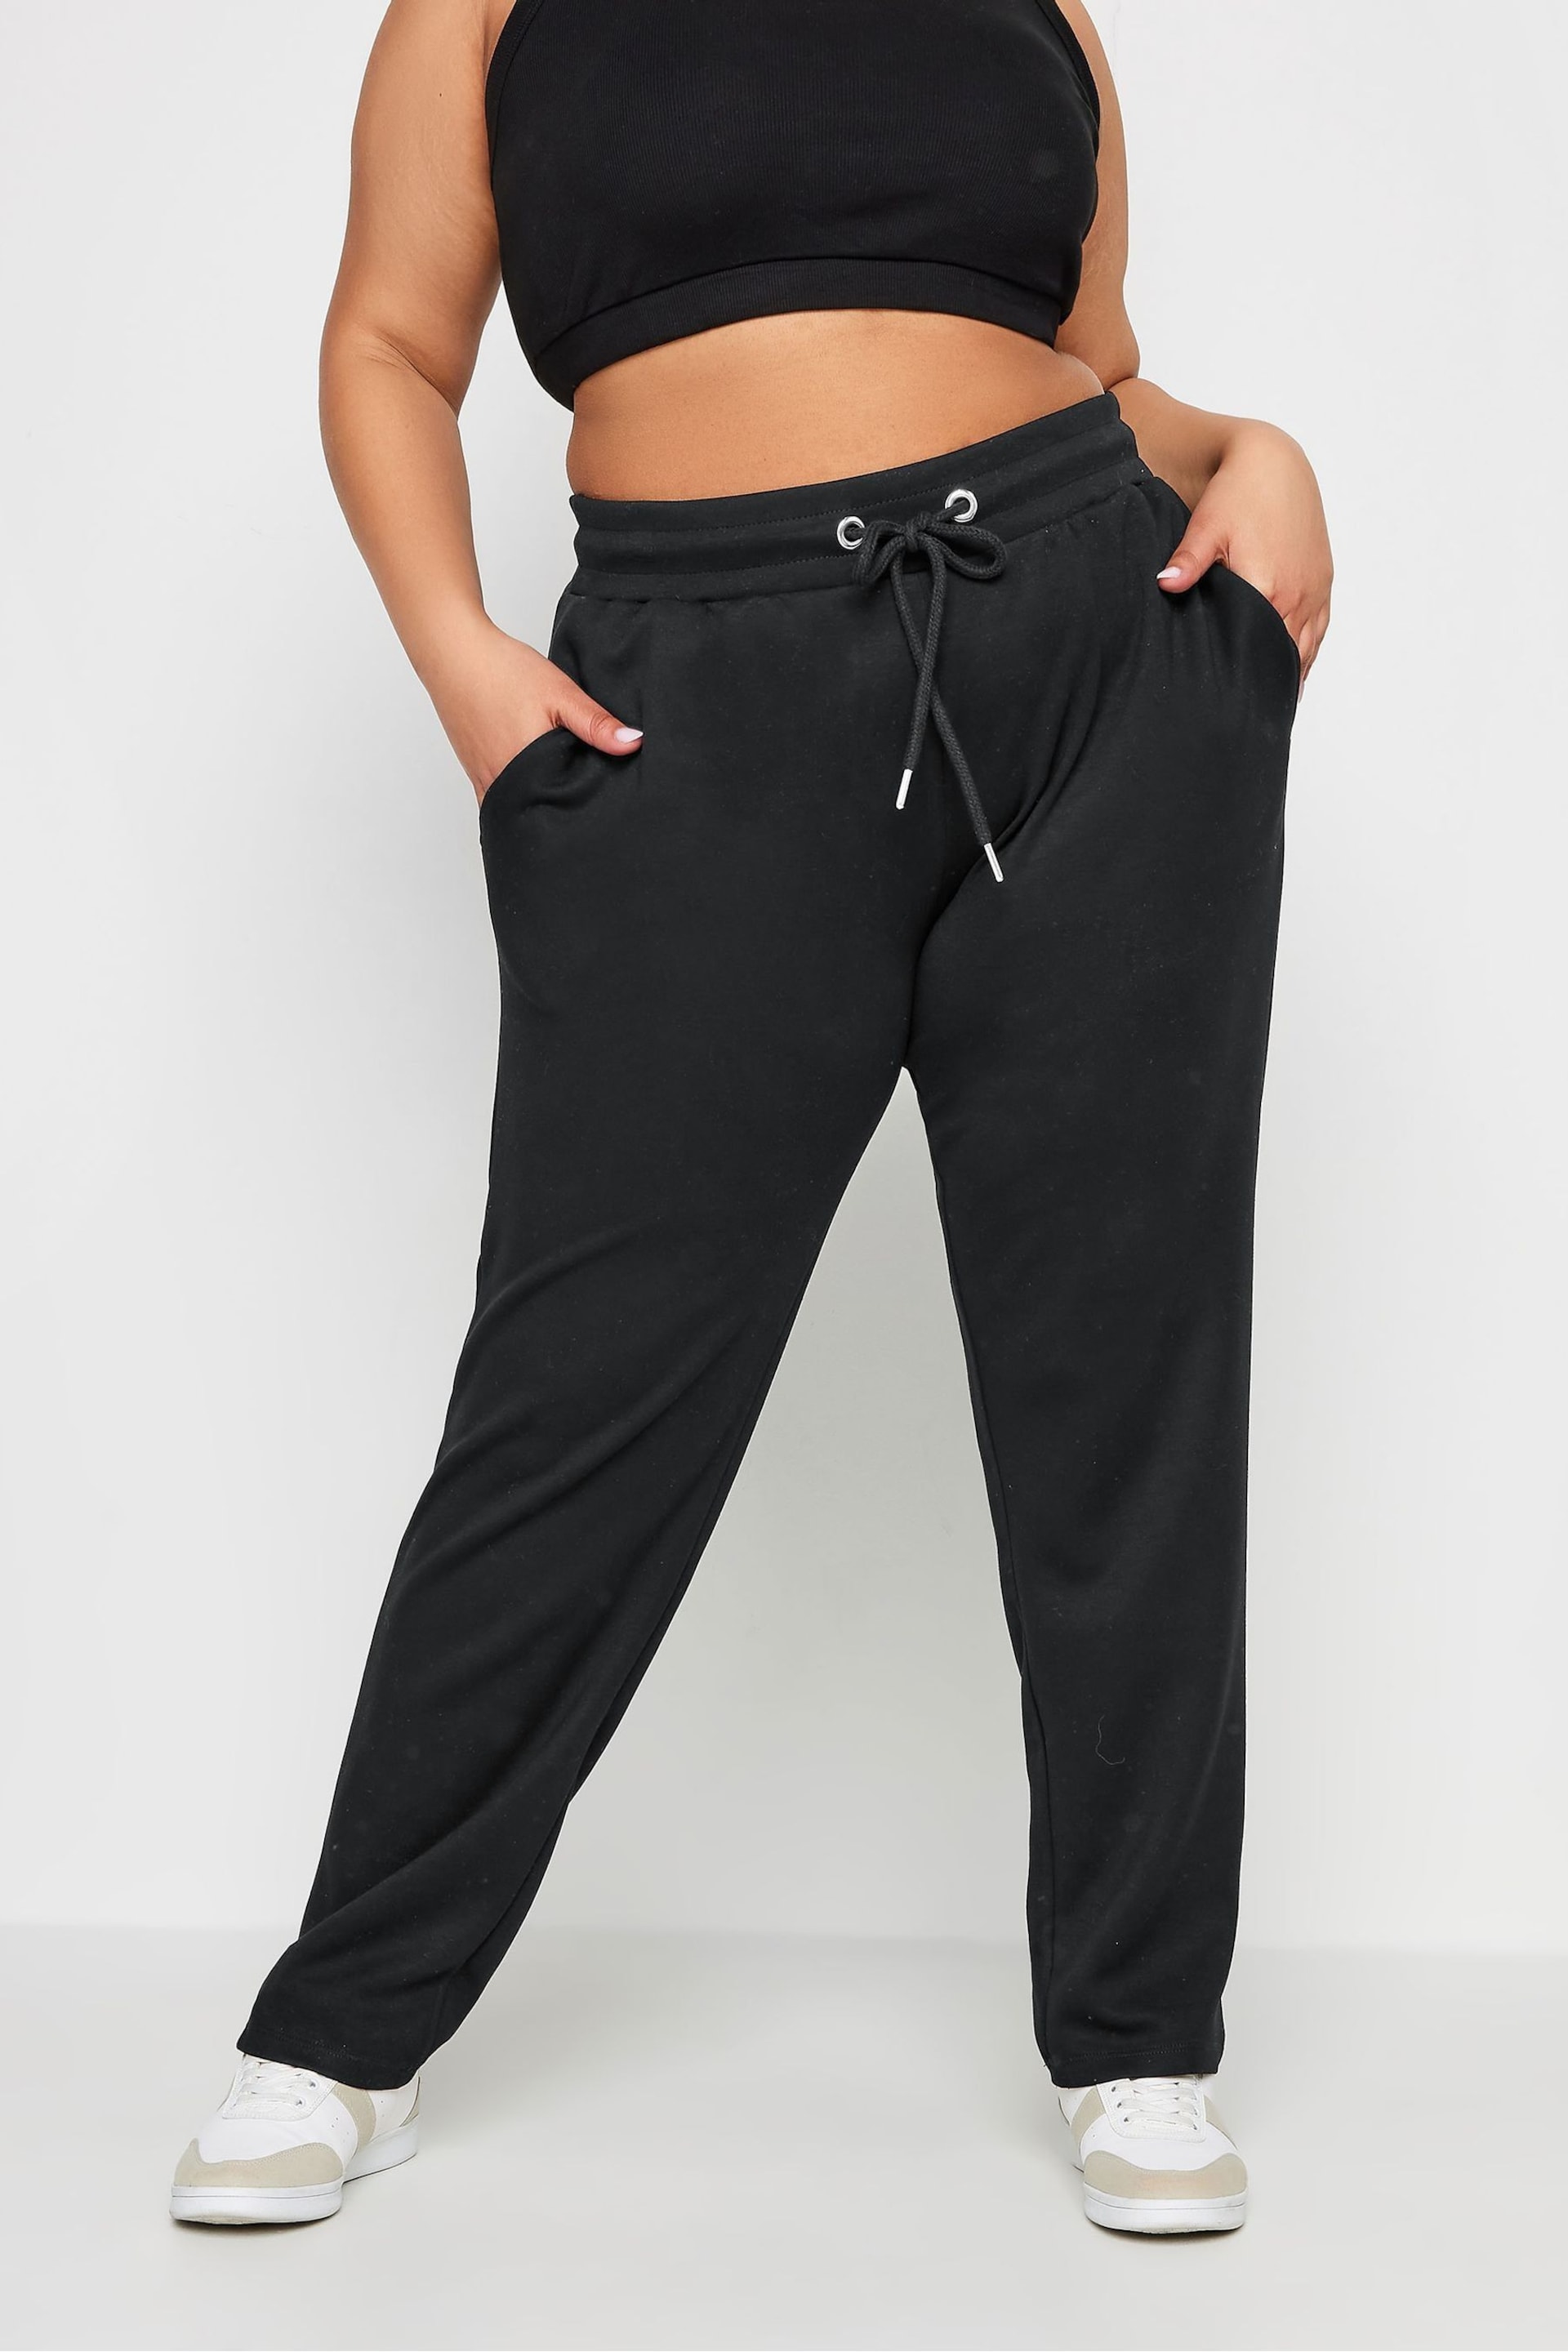 Yours Curve Black Straight Leg Stretch Joggers - Image 1 of 5